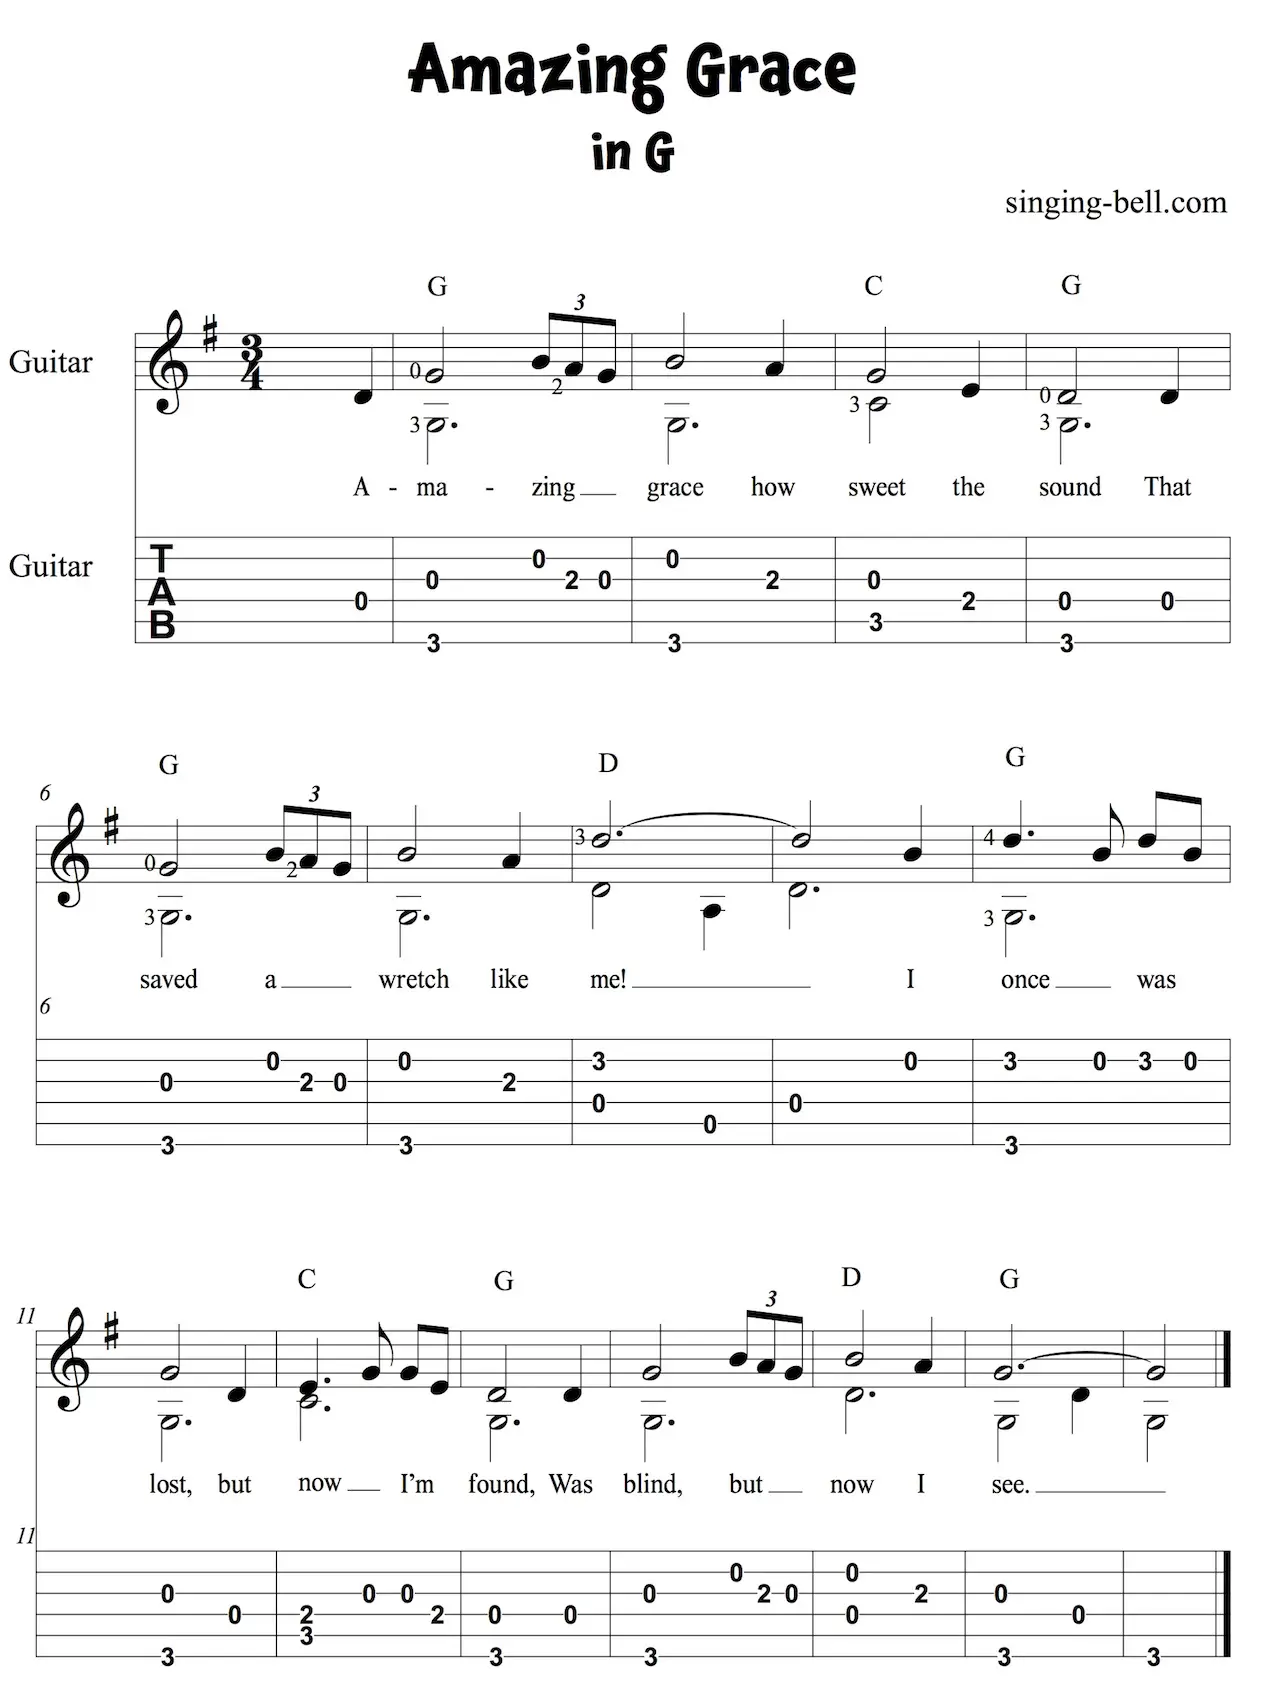 Amazing Grace Easy Guitar Sheet Music with Notes and Tablature in G.